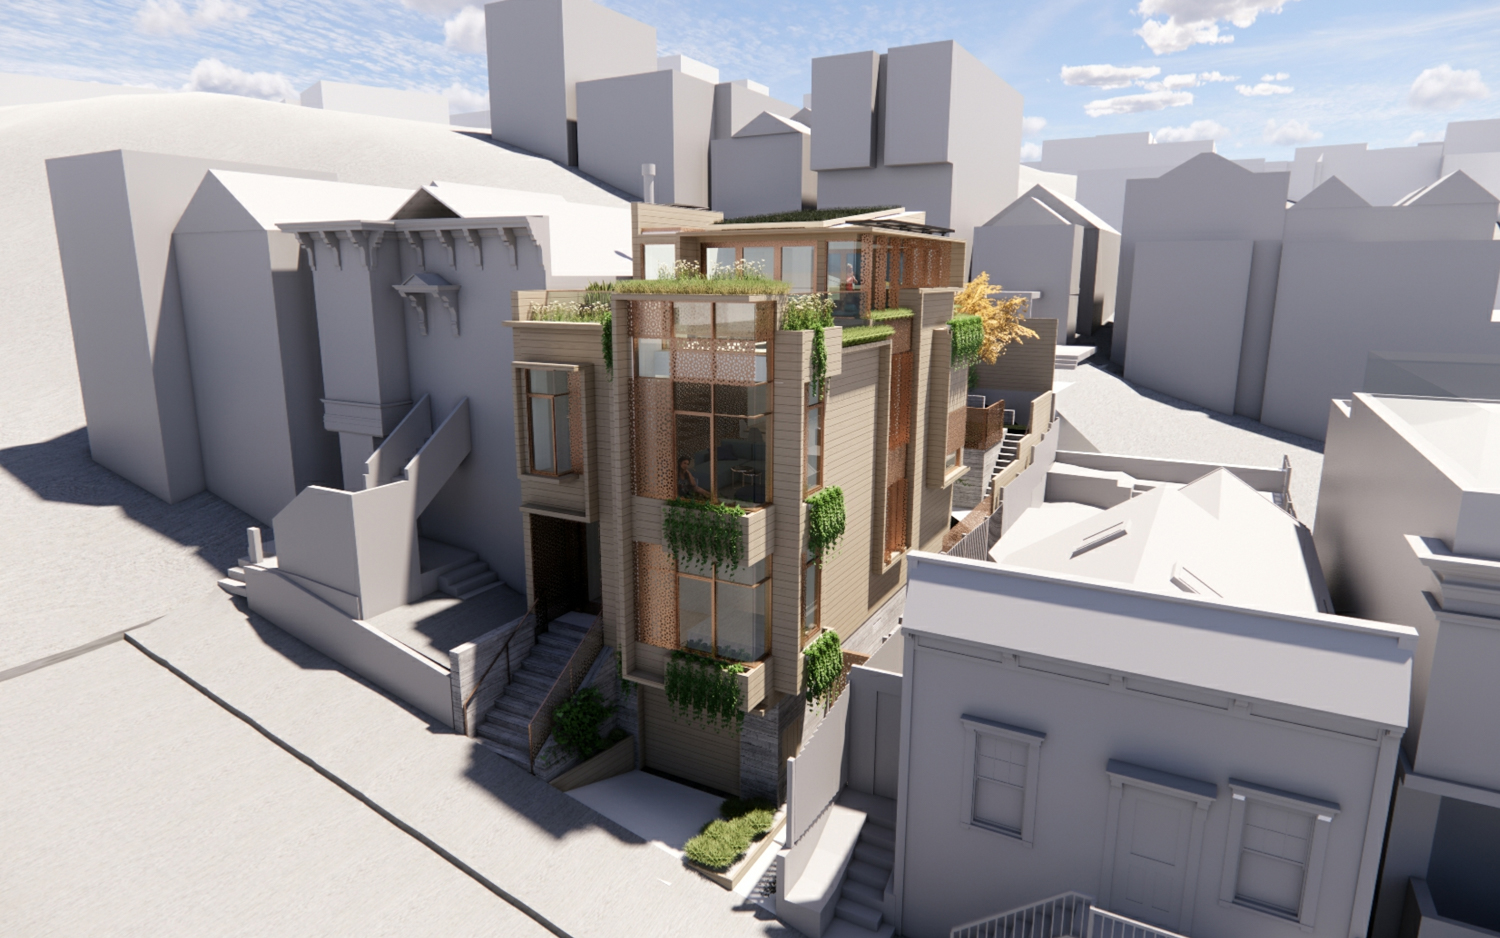 315 Rutledge Street aerial view, rendering by DOES Architecture